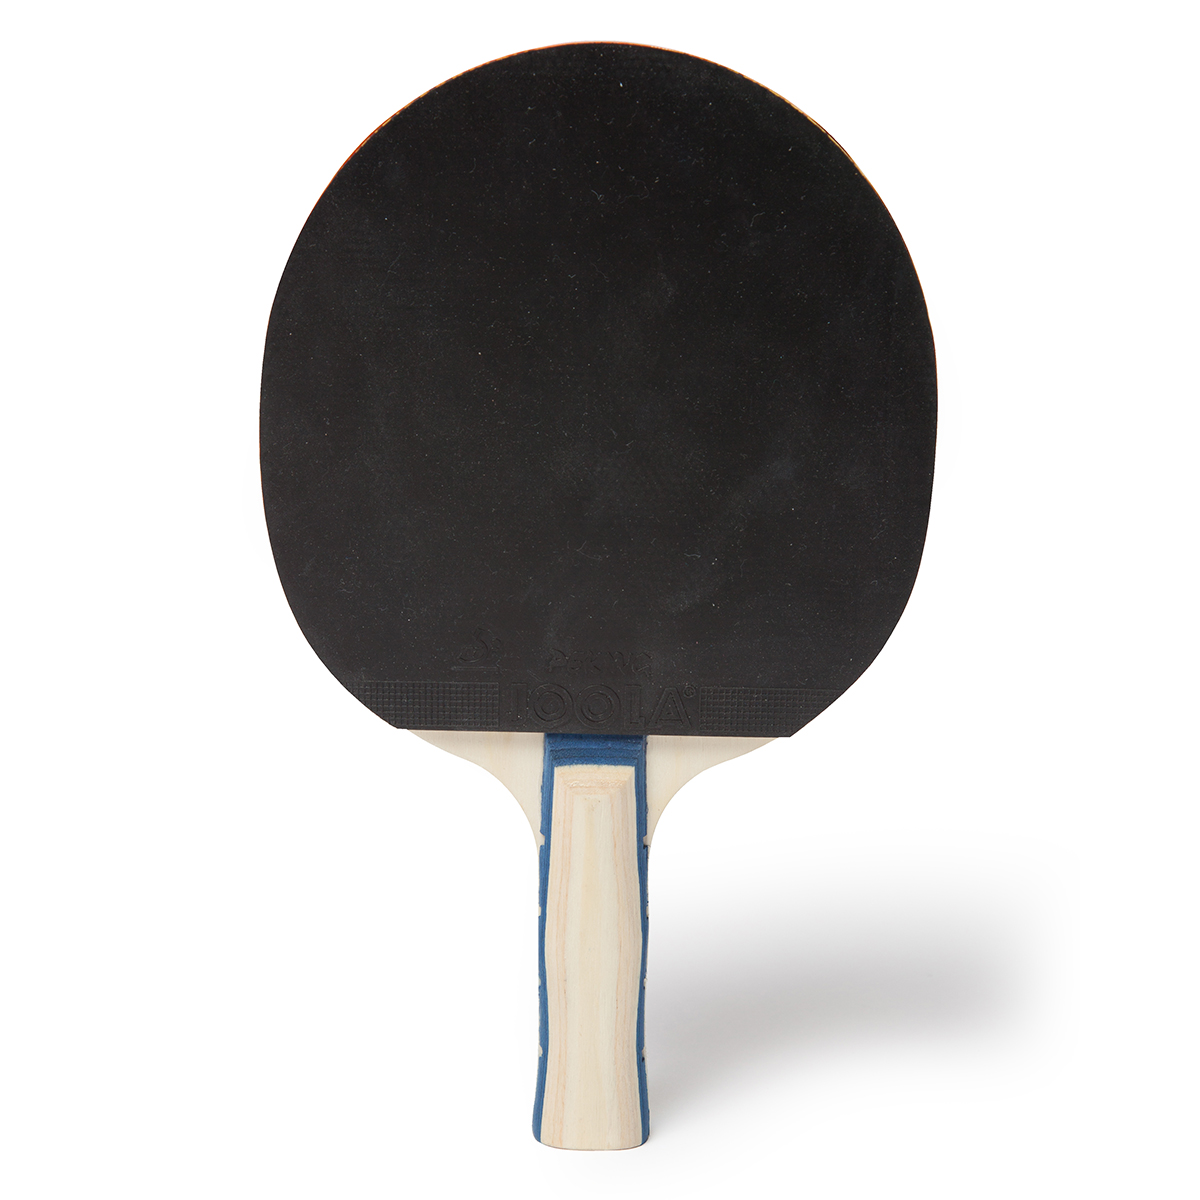 JOOLA Tour Carrying Case Ping Pong Paddle Case with 18 40mm 3 Star Competition 